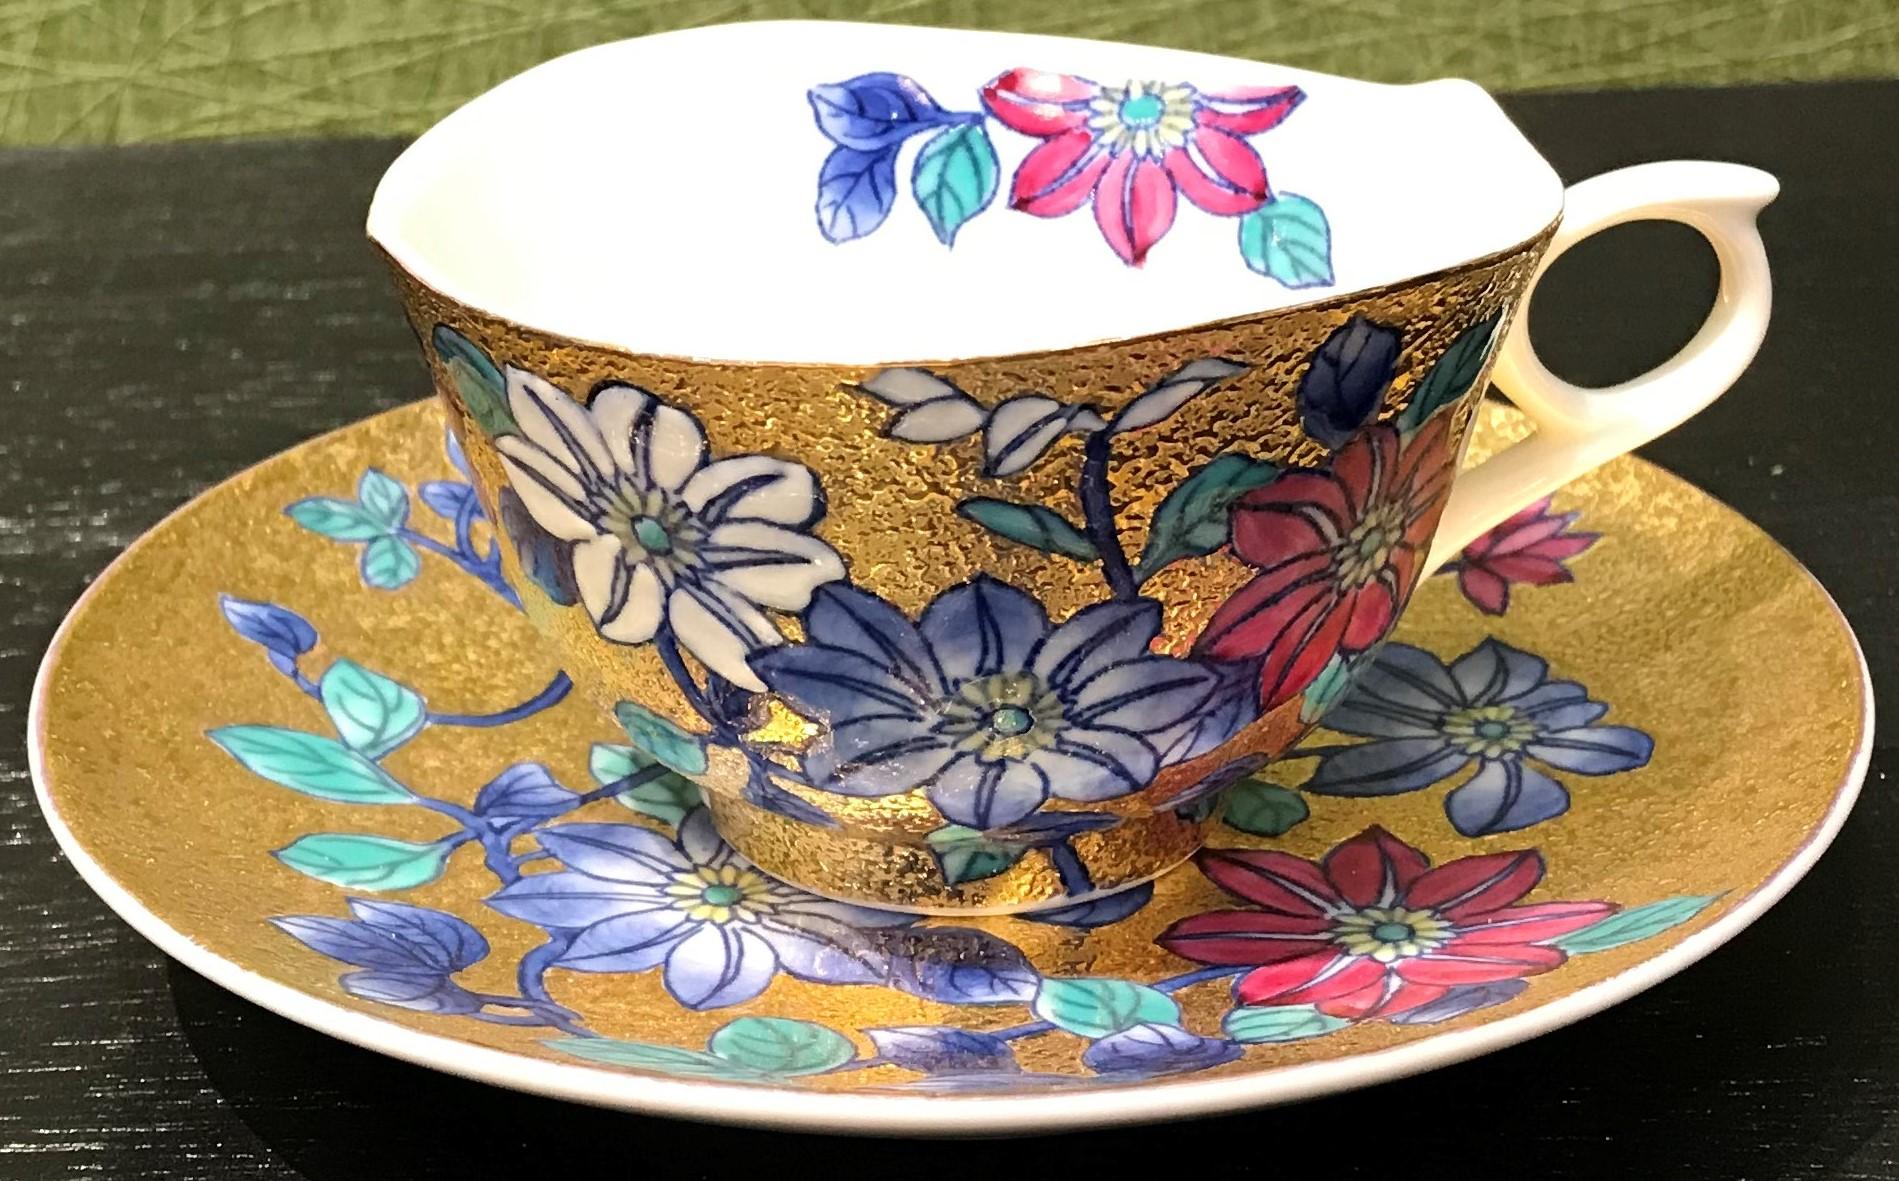 Striking contemporary gilded fine porcelain cup and saucer, intricately hand painted in vivid blue and red and white on an attractive gilded body, featuring stunning clematis flowers in full bloom. This cup and saucer is from a signature series by a